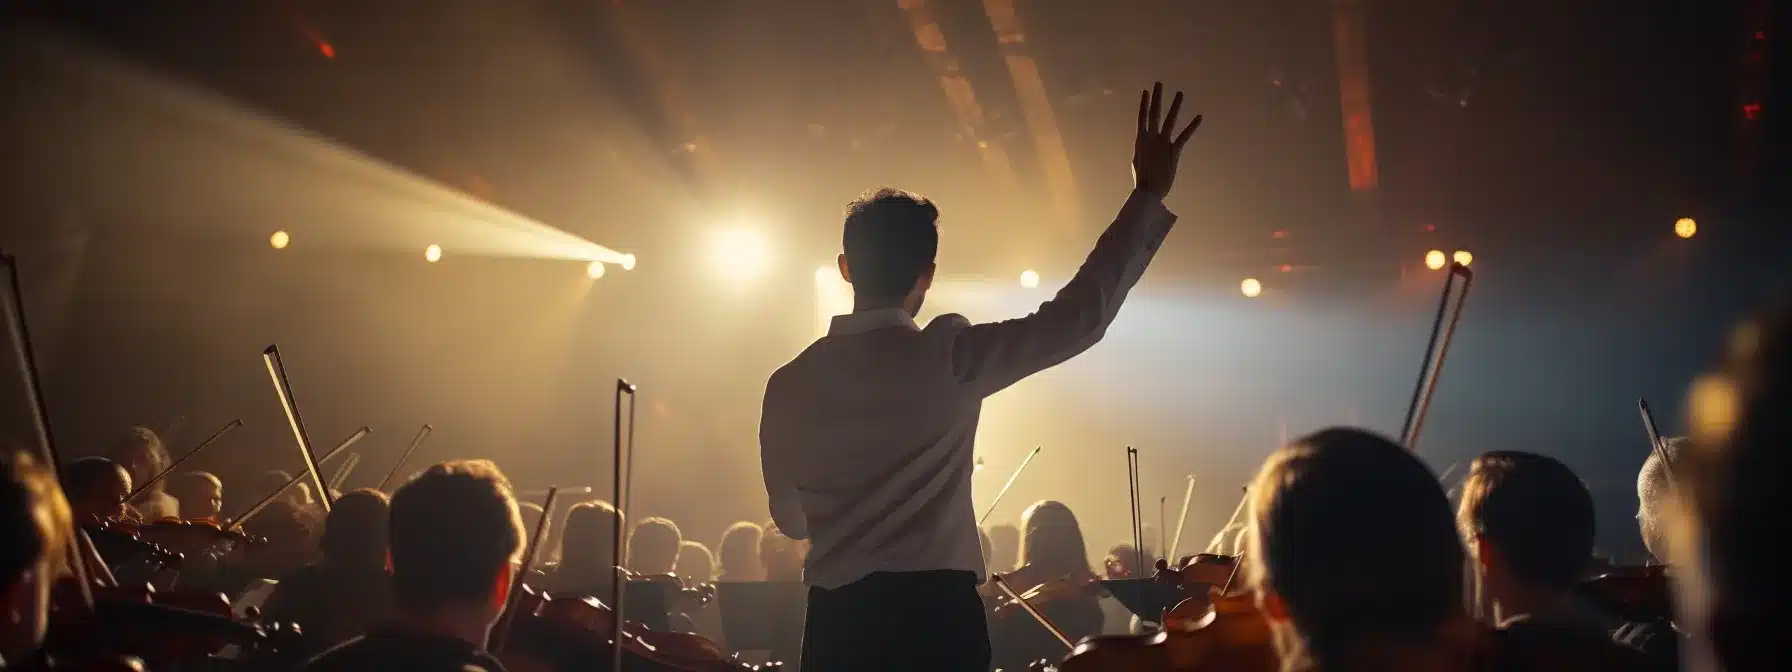 A Symphony Conductor Guiding A Harmonious Orchestra Performance.